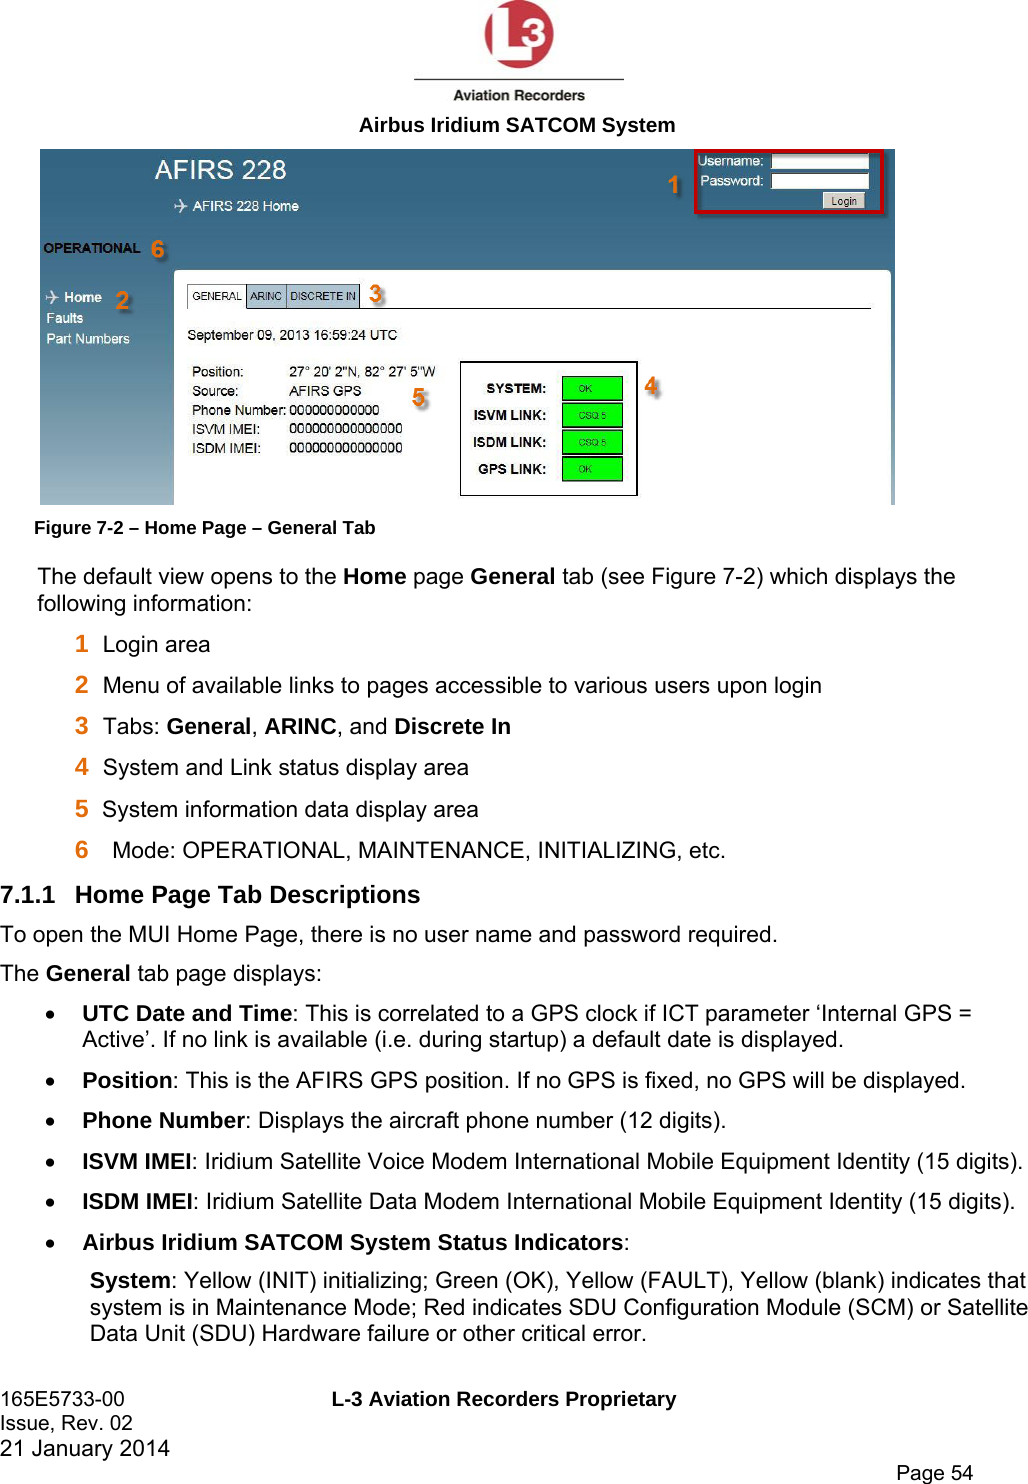  Airbus Iridium SATCOM System 165E5733-00  L-3 Aviation Recorders Proprietary Issue, Rev. 02   21 January 2014      Page 54  Figure 7-2 – Home Page – General Tab The default view opens to the Home page General tab (see Figure 7-2) which displays the following information:  1  Login area 2  Menu of available links to pages accessible to various users upon login 3  Tabs: General, ARINC, and Discrete In 4  System and Link status display area  5  System information data display area  6  Mode: OPERATIONAL, MAINTENANCE, INITIALIZING, etc. 7.1.1  Home Page Tab Descriptions  To open the MUI Home Page, there is no user name and password required. The General tab page displays:  UTC Date and Time: This is correlated to a GPS clock if ICT parameter ‘Internal GPS = Active’. If no link is available (i.e. during startup) a default date is displayed.   Position: This is the AFIRS GPS position. If no GPS is fixed, no GPS will be displayed.  Phone Number: Displays the aircraft phone number (12 digits).   ISVM IMEI: Iridium Satellite Voice Modem International Mobile Equipment Identity (15 digits).  ISDM IMEI: Iridium Satellite Data Modem International Mobile Equipment Identity (15 digits).  Airbus Iridium SATCOM System Status Indicators: System: Yellow (INIT) initializing; Green (OK), Yellow (FAULT), Yellow (blank) indicates that system is in Maintenance Mode; Red indicates SDU Configuration Module (SCM) or Satellite Data Unit (SDU) Hardware failure or other critical error. 